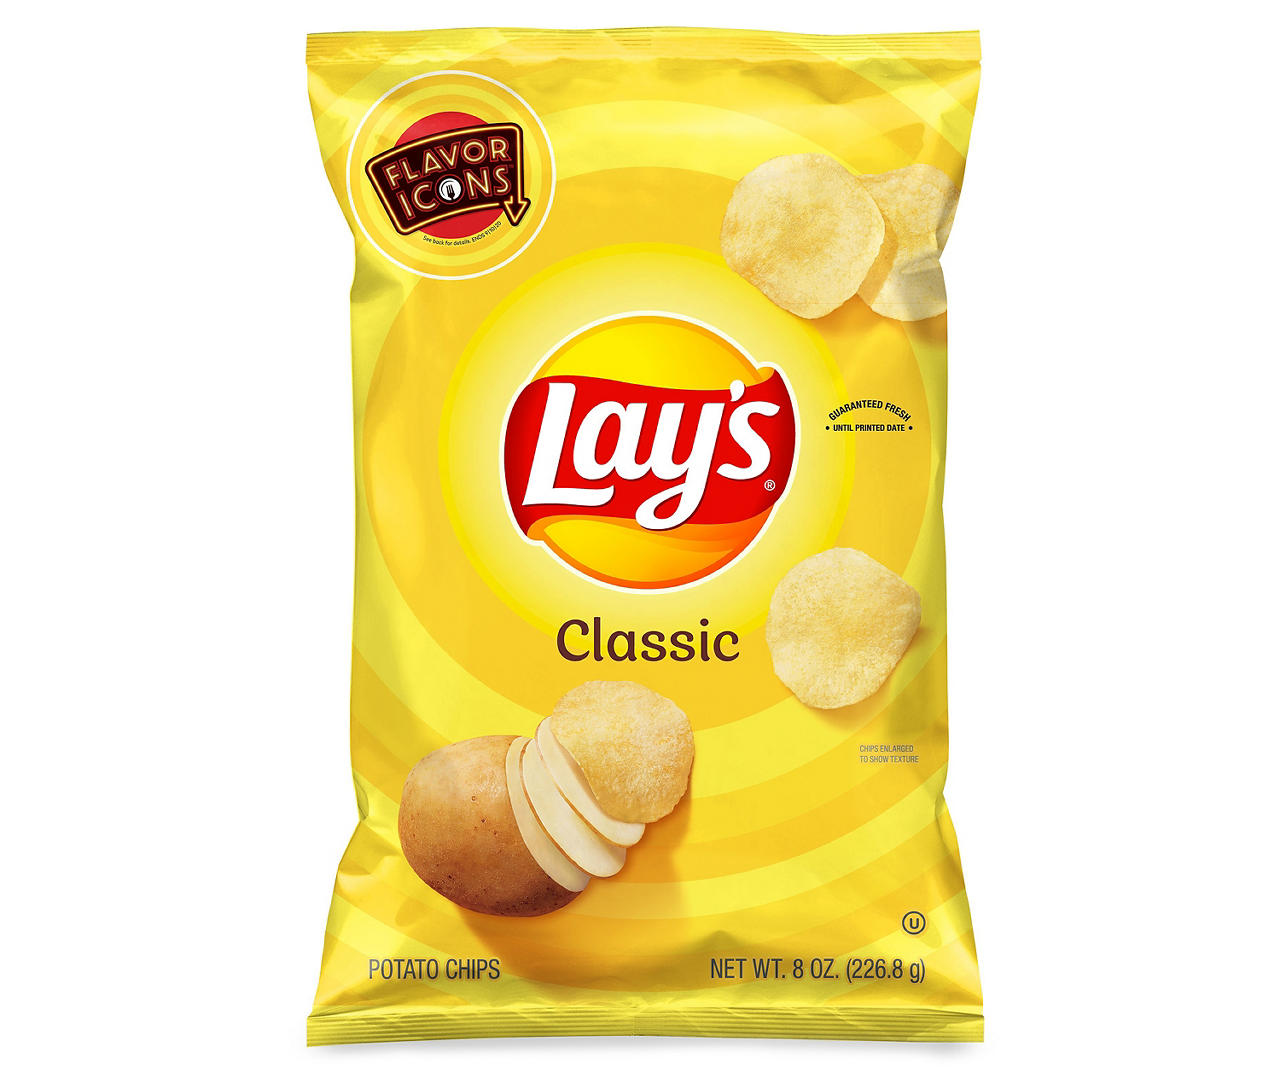 New Accounts: Lay's Potato Chips: 8-Oz Classic, 7.75-Oz Sour Cream & Onion, Barbeque, Wavy, Salt & Vinegar, More 3 for $4.31 ($1.43 each) + Free Pickup at Big Lots